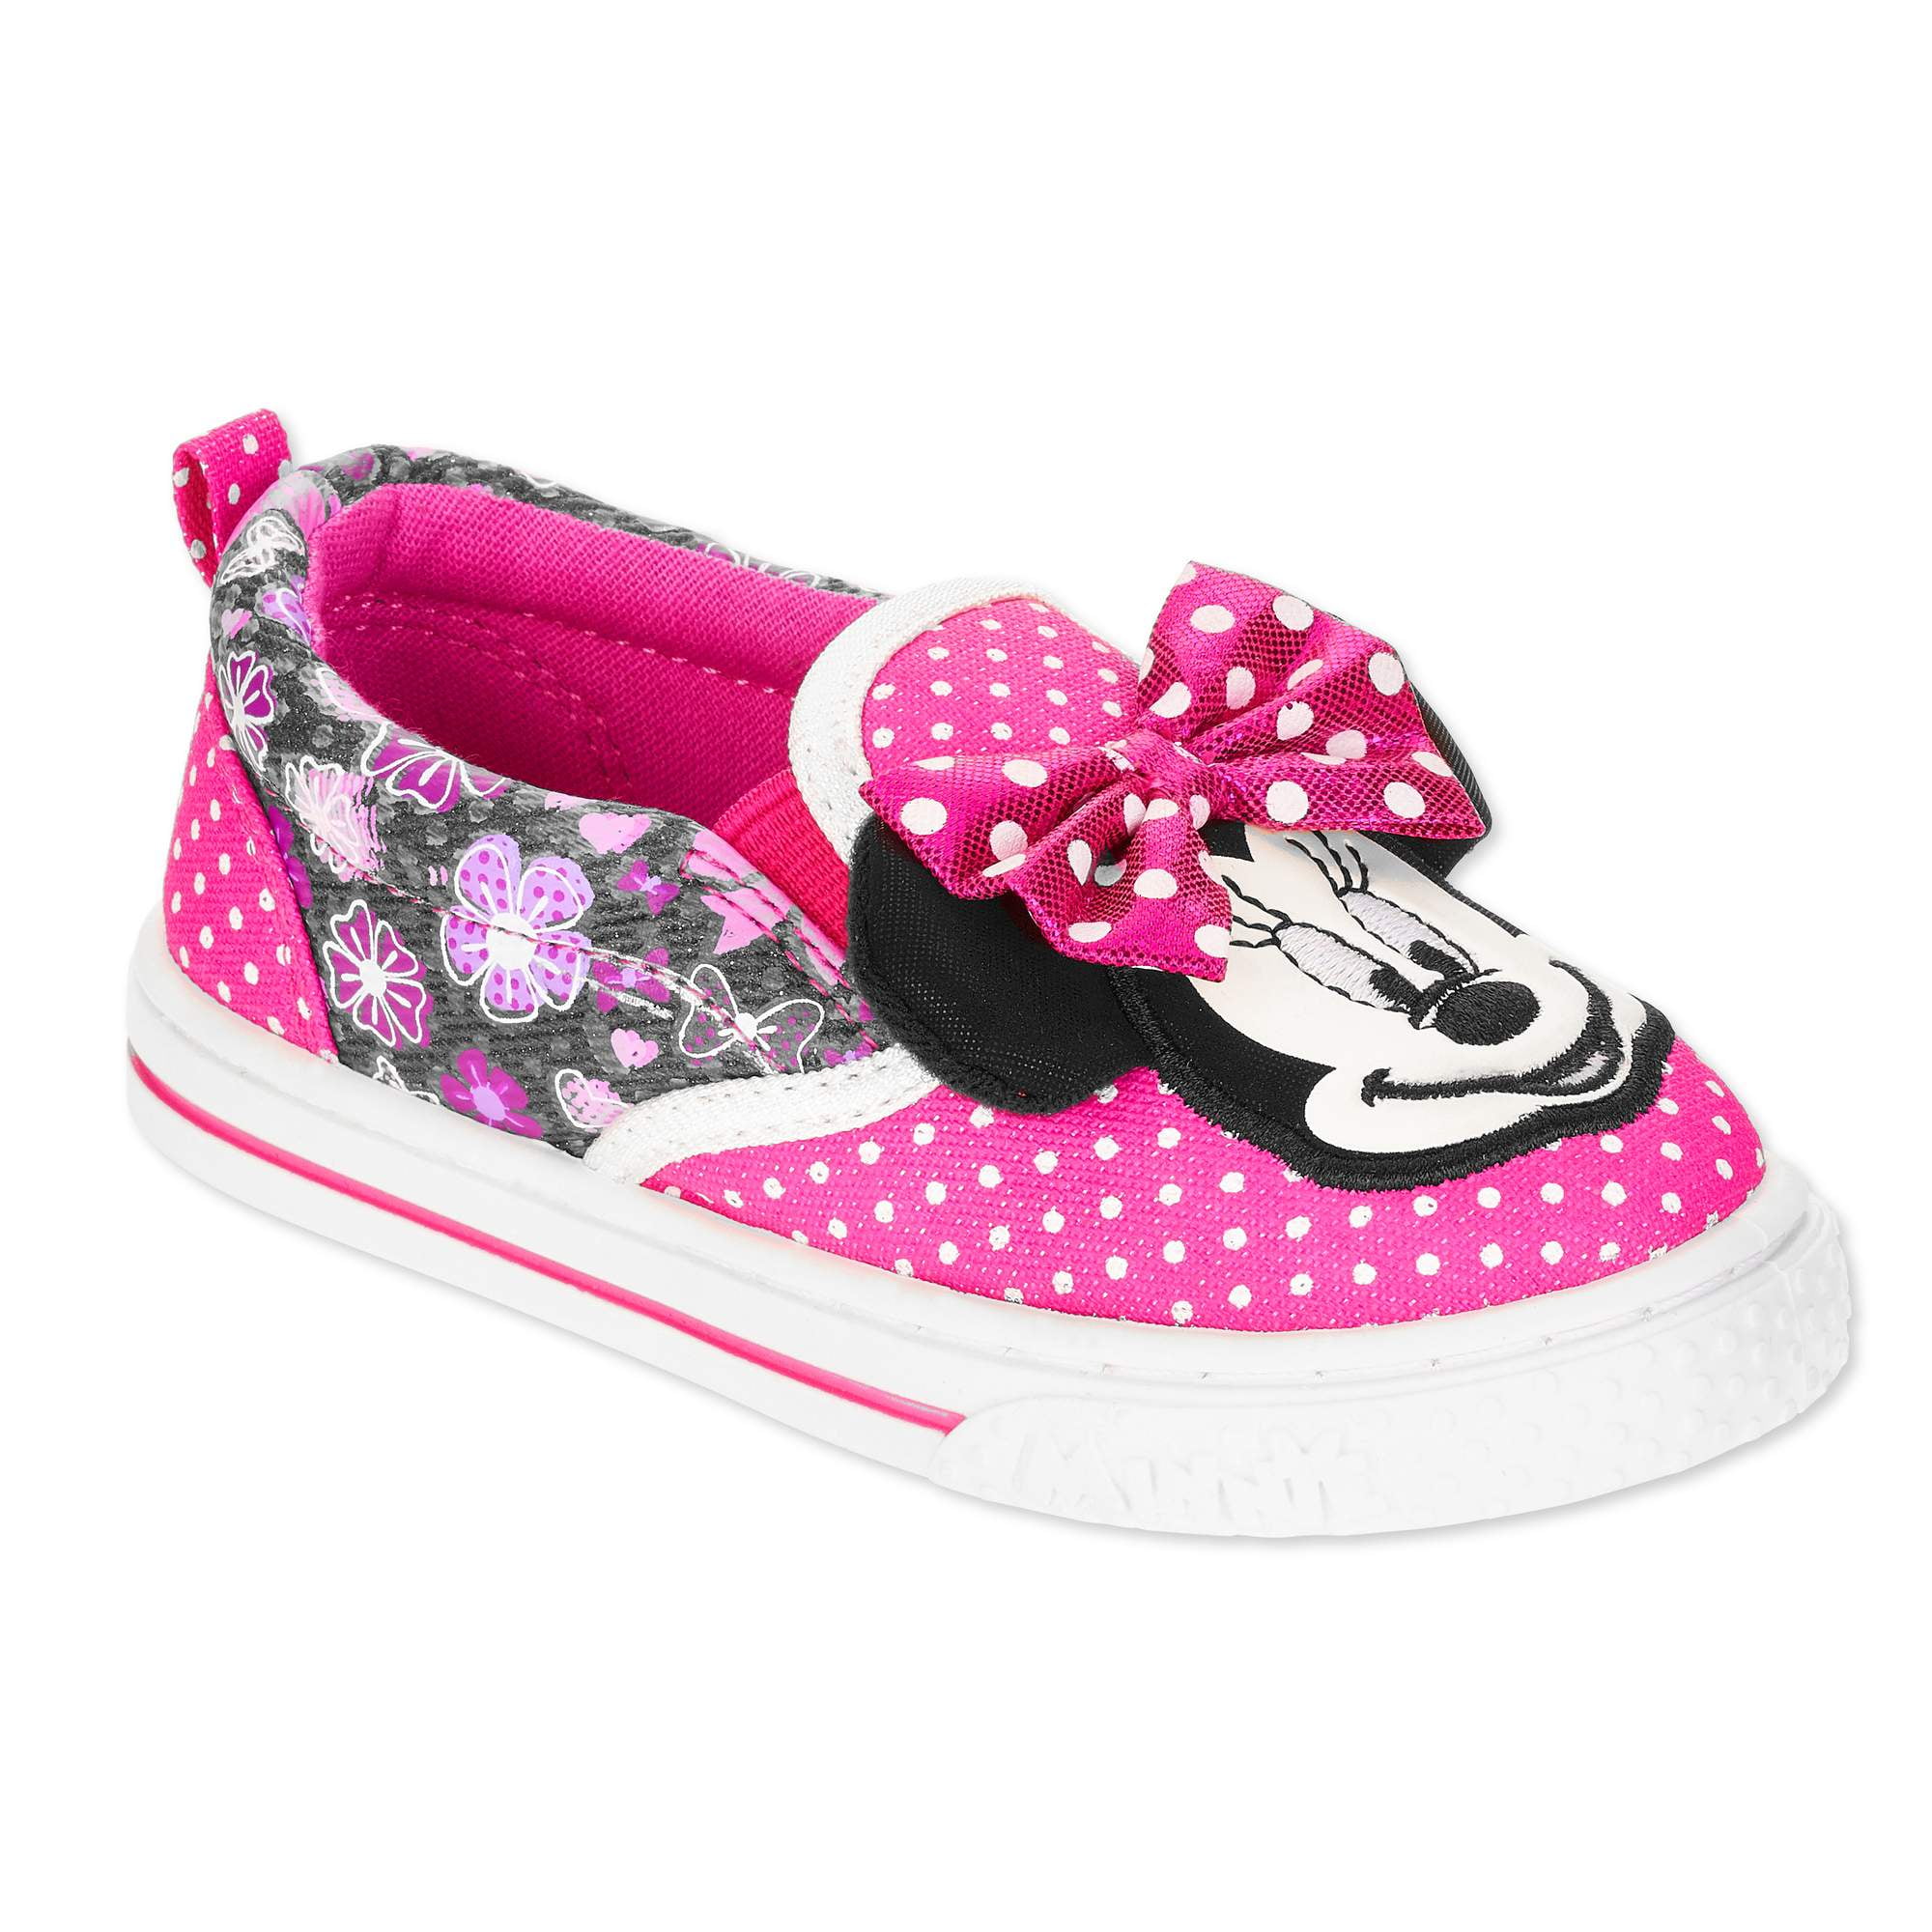 Girls minnie mouse shoes